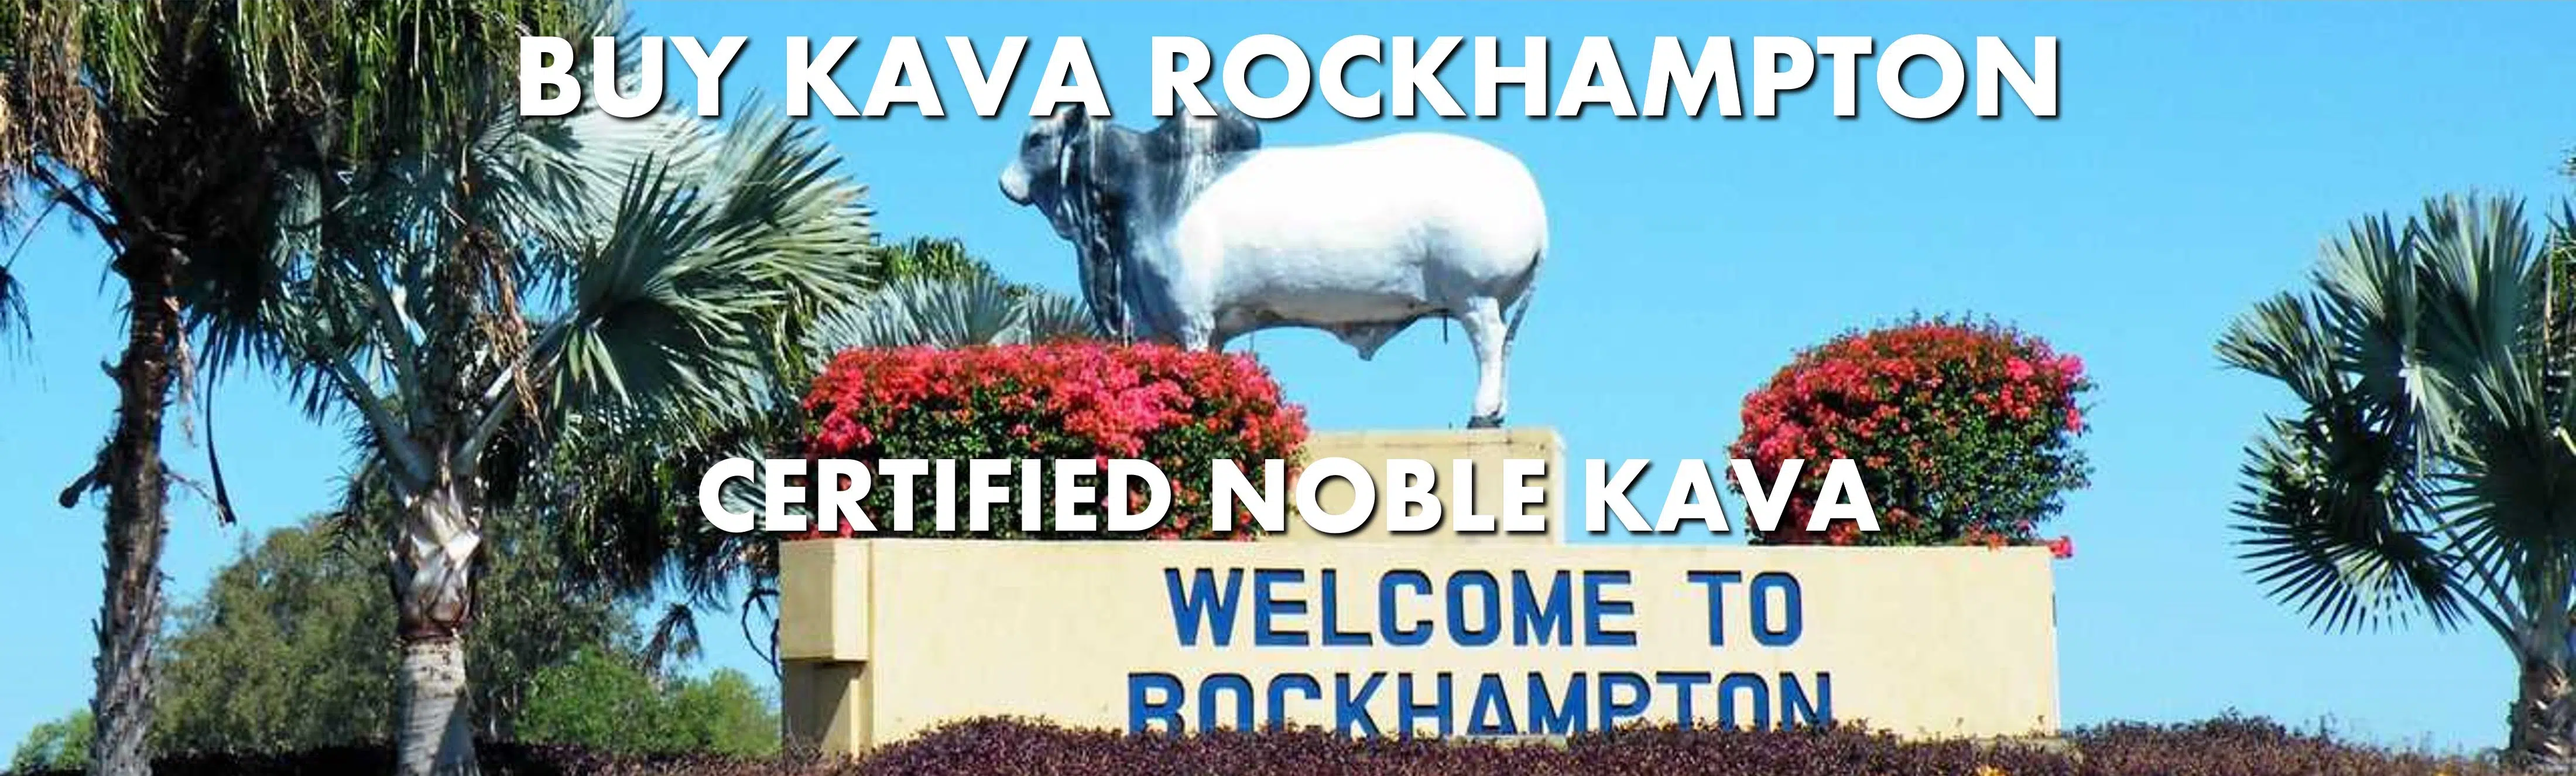 Welcome sign for Rockhampton Queensland with caption Buy Kava Rockhampton Certified Noble Kava